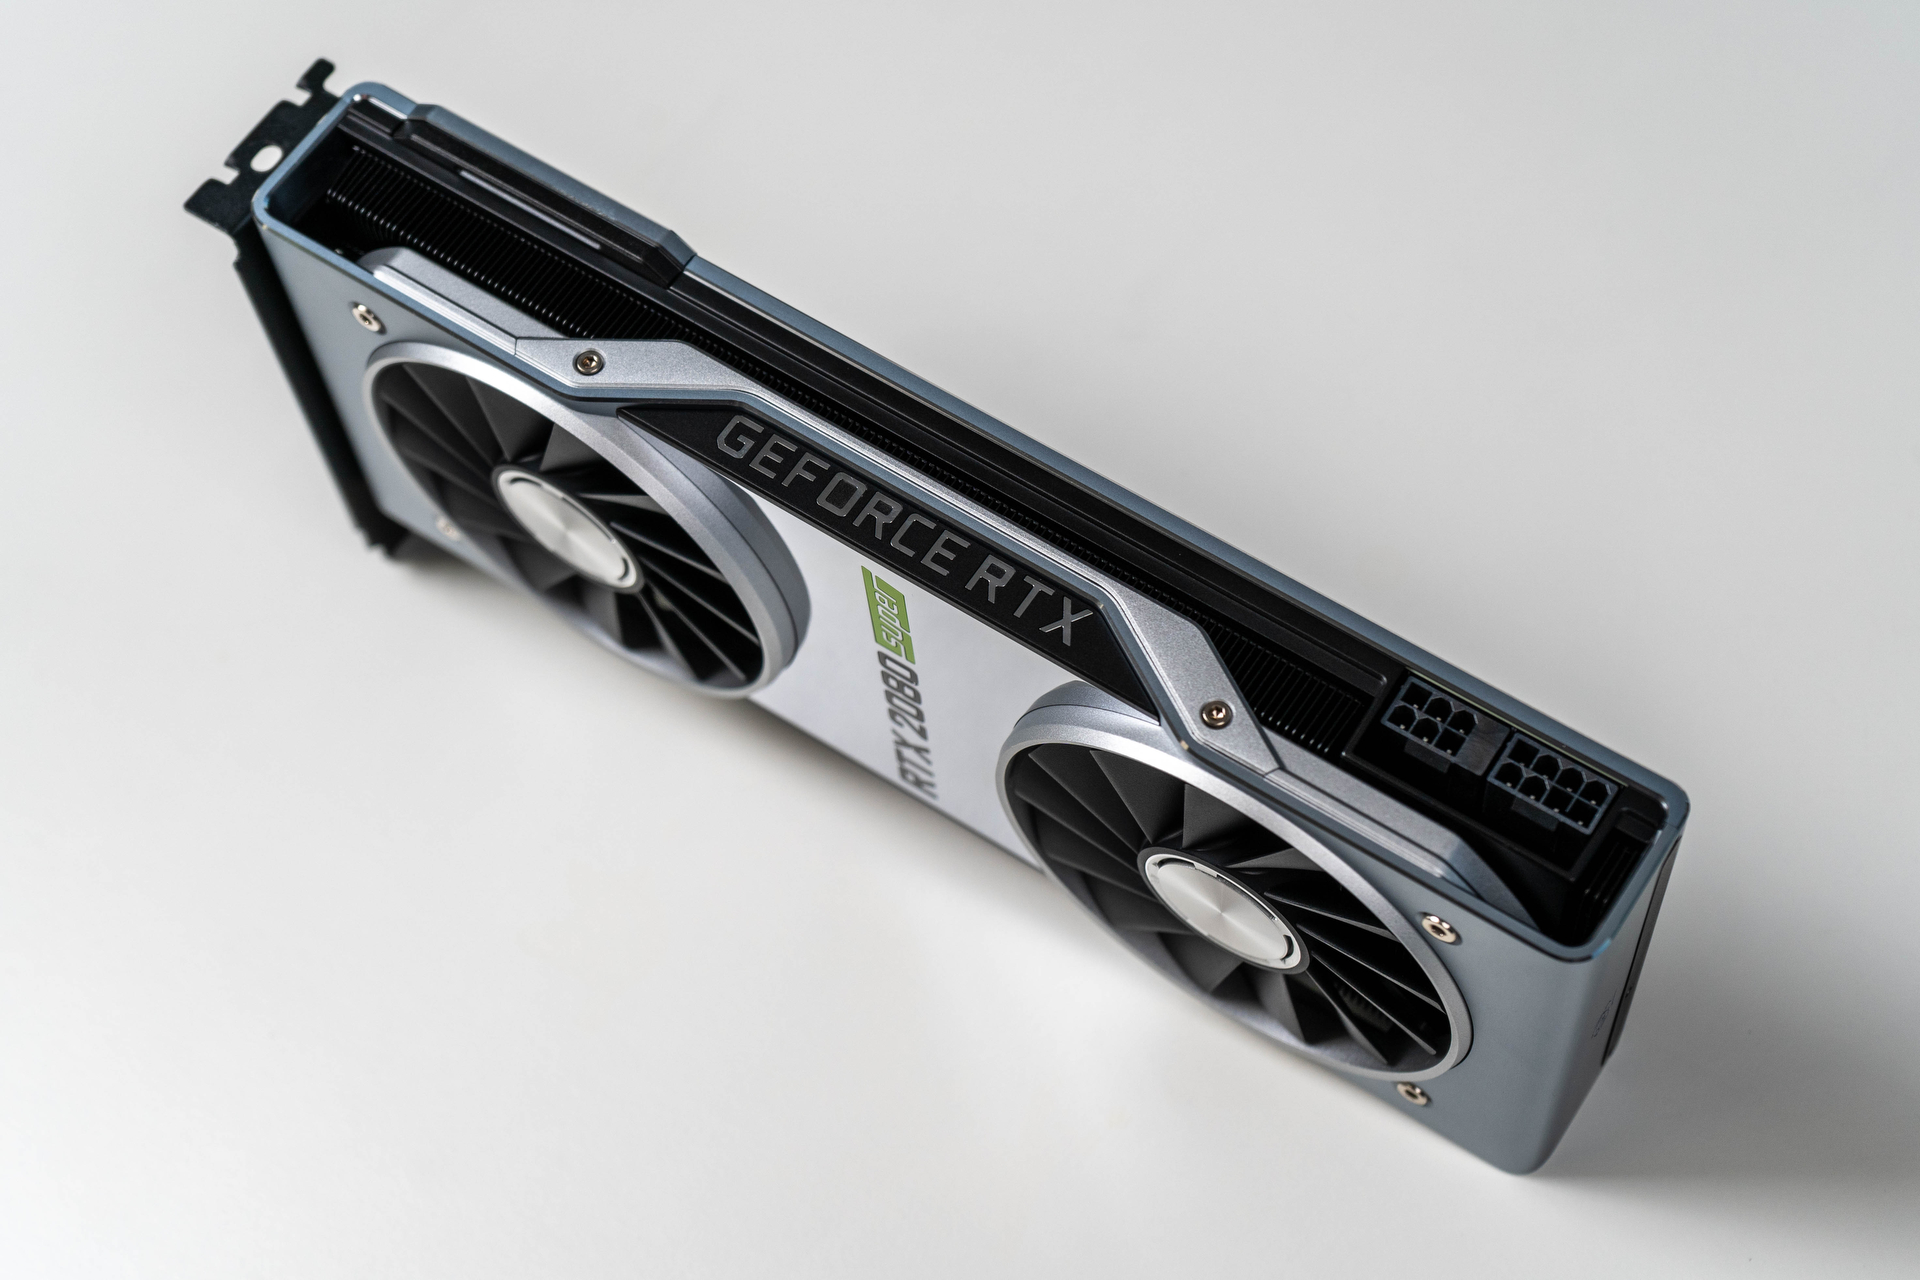 Nvidia GeForce RTX 2080 Super review: Still stuck in the middle